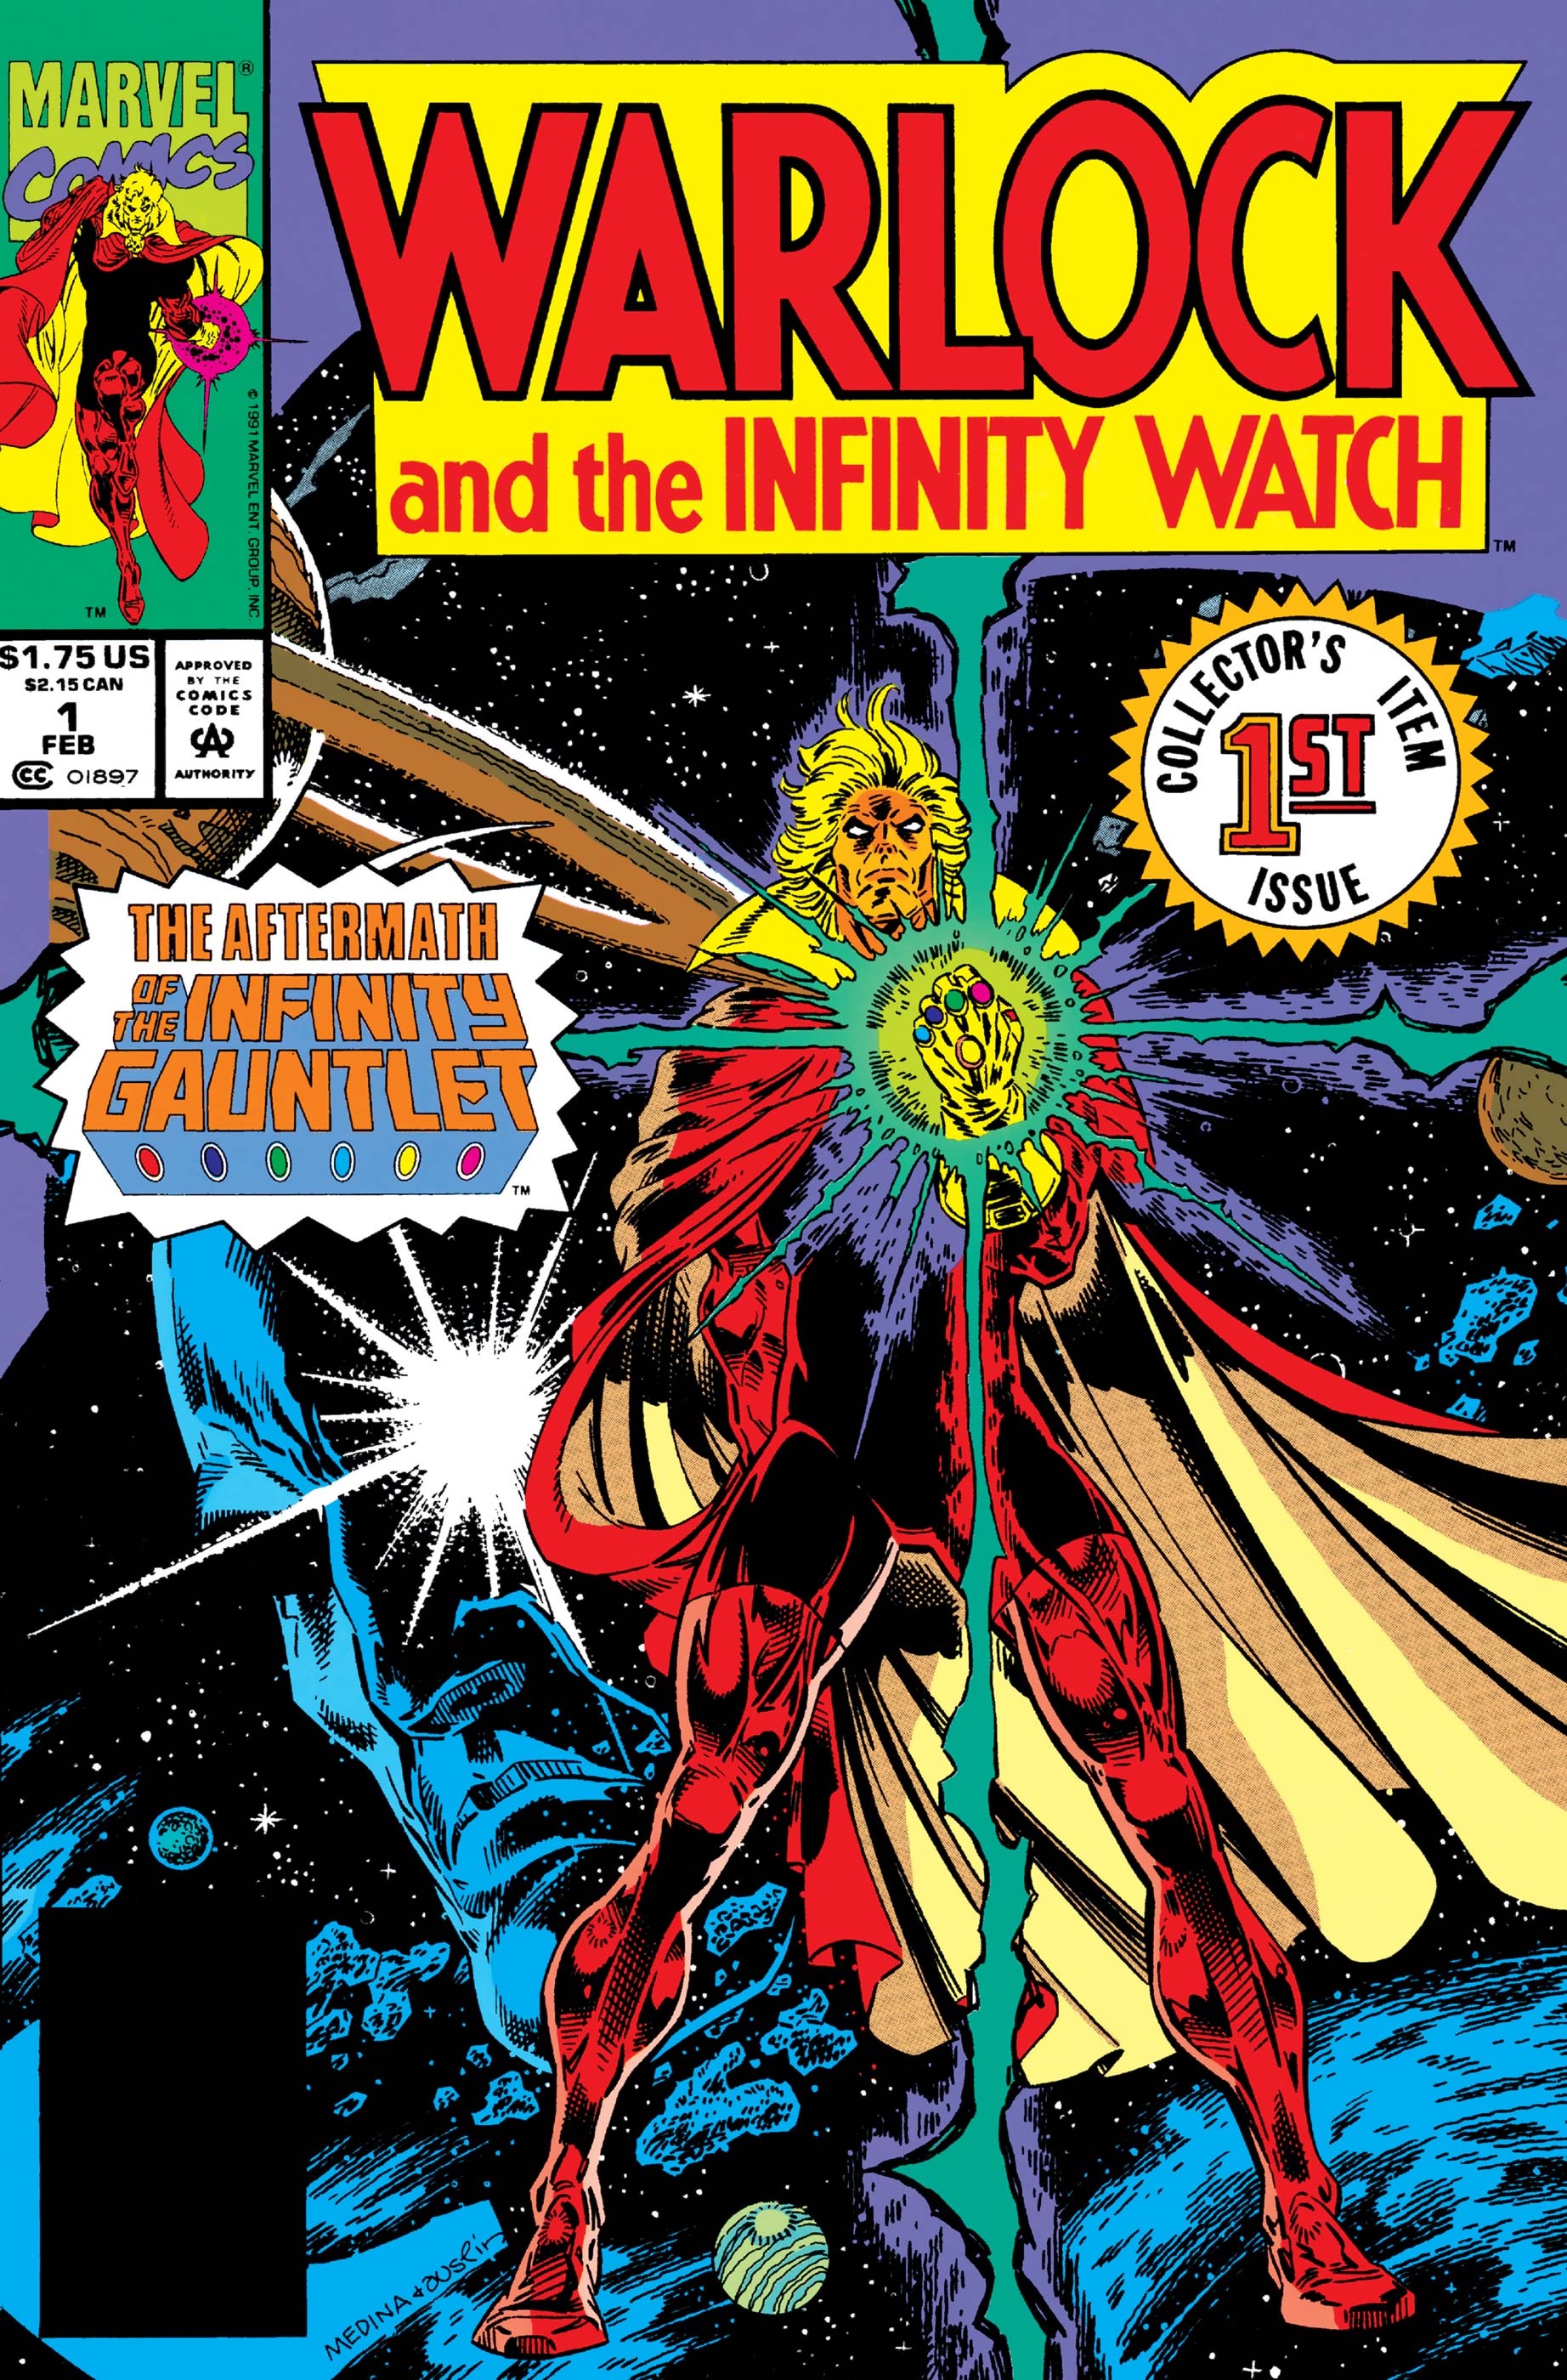 Drax the Destroyer - Marvel Comics - Infinity Watch - Profile 2 -  Writeups.org